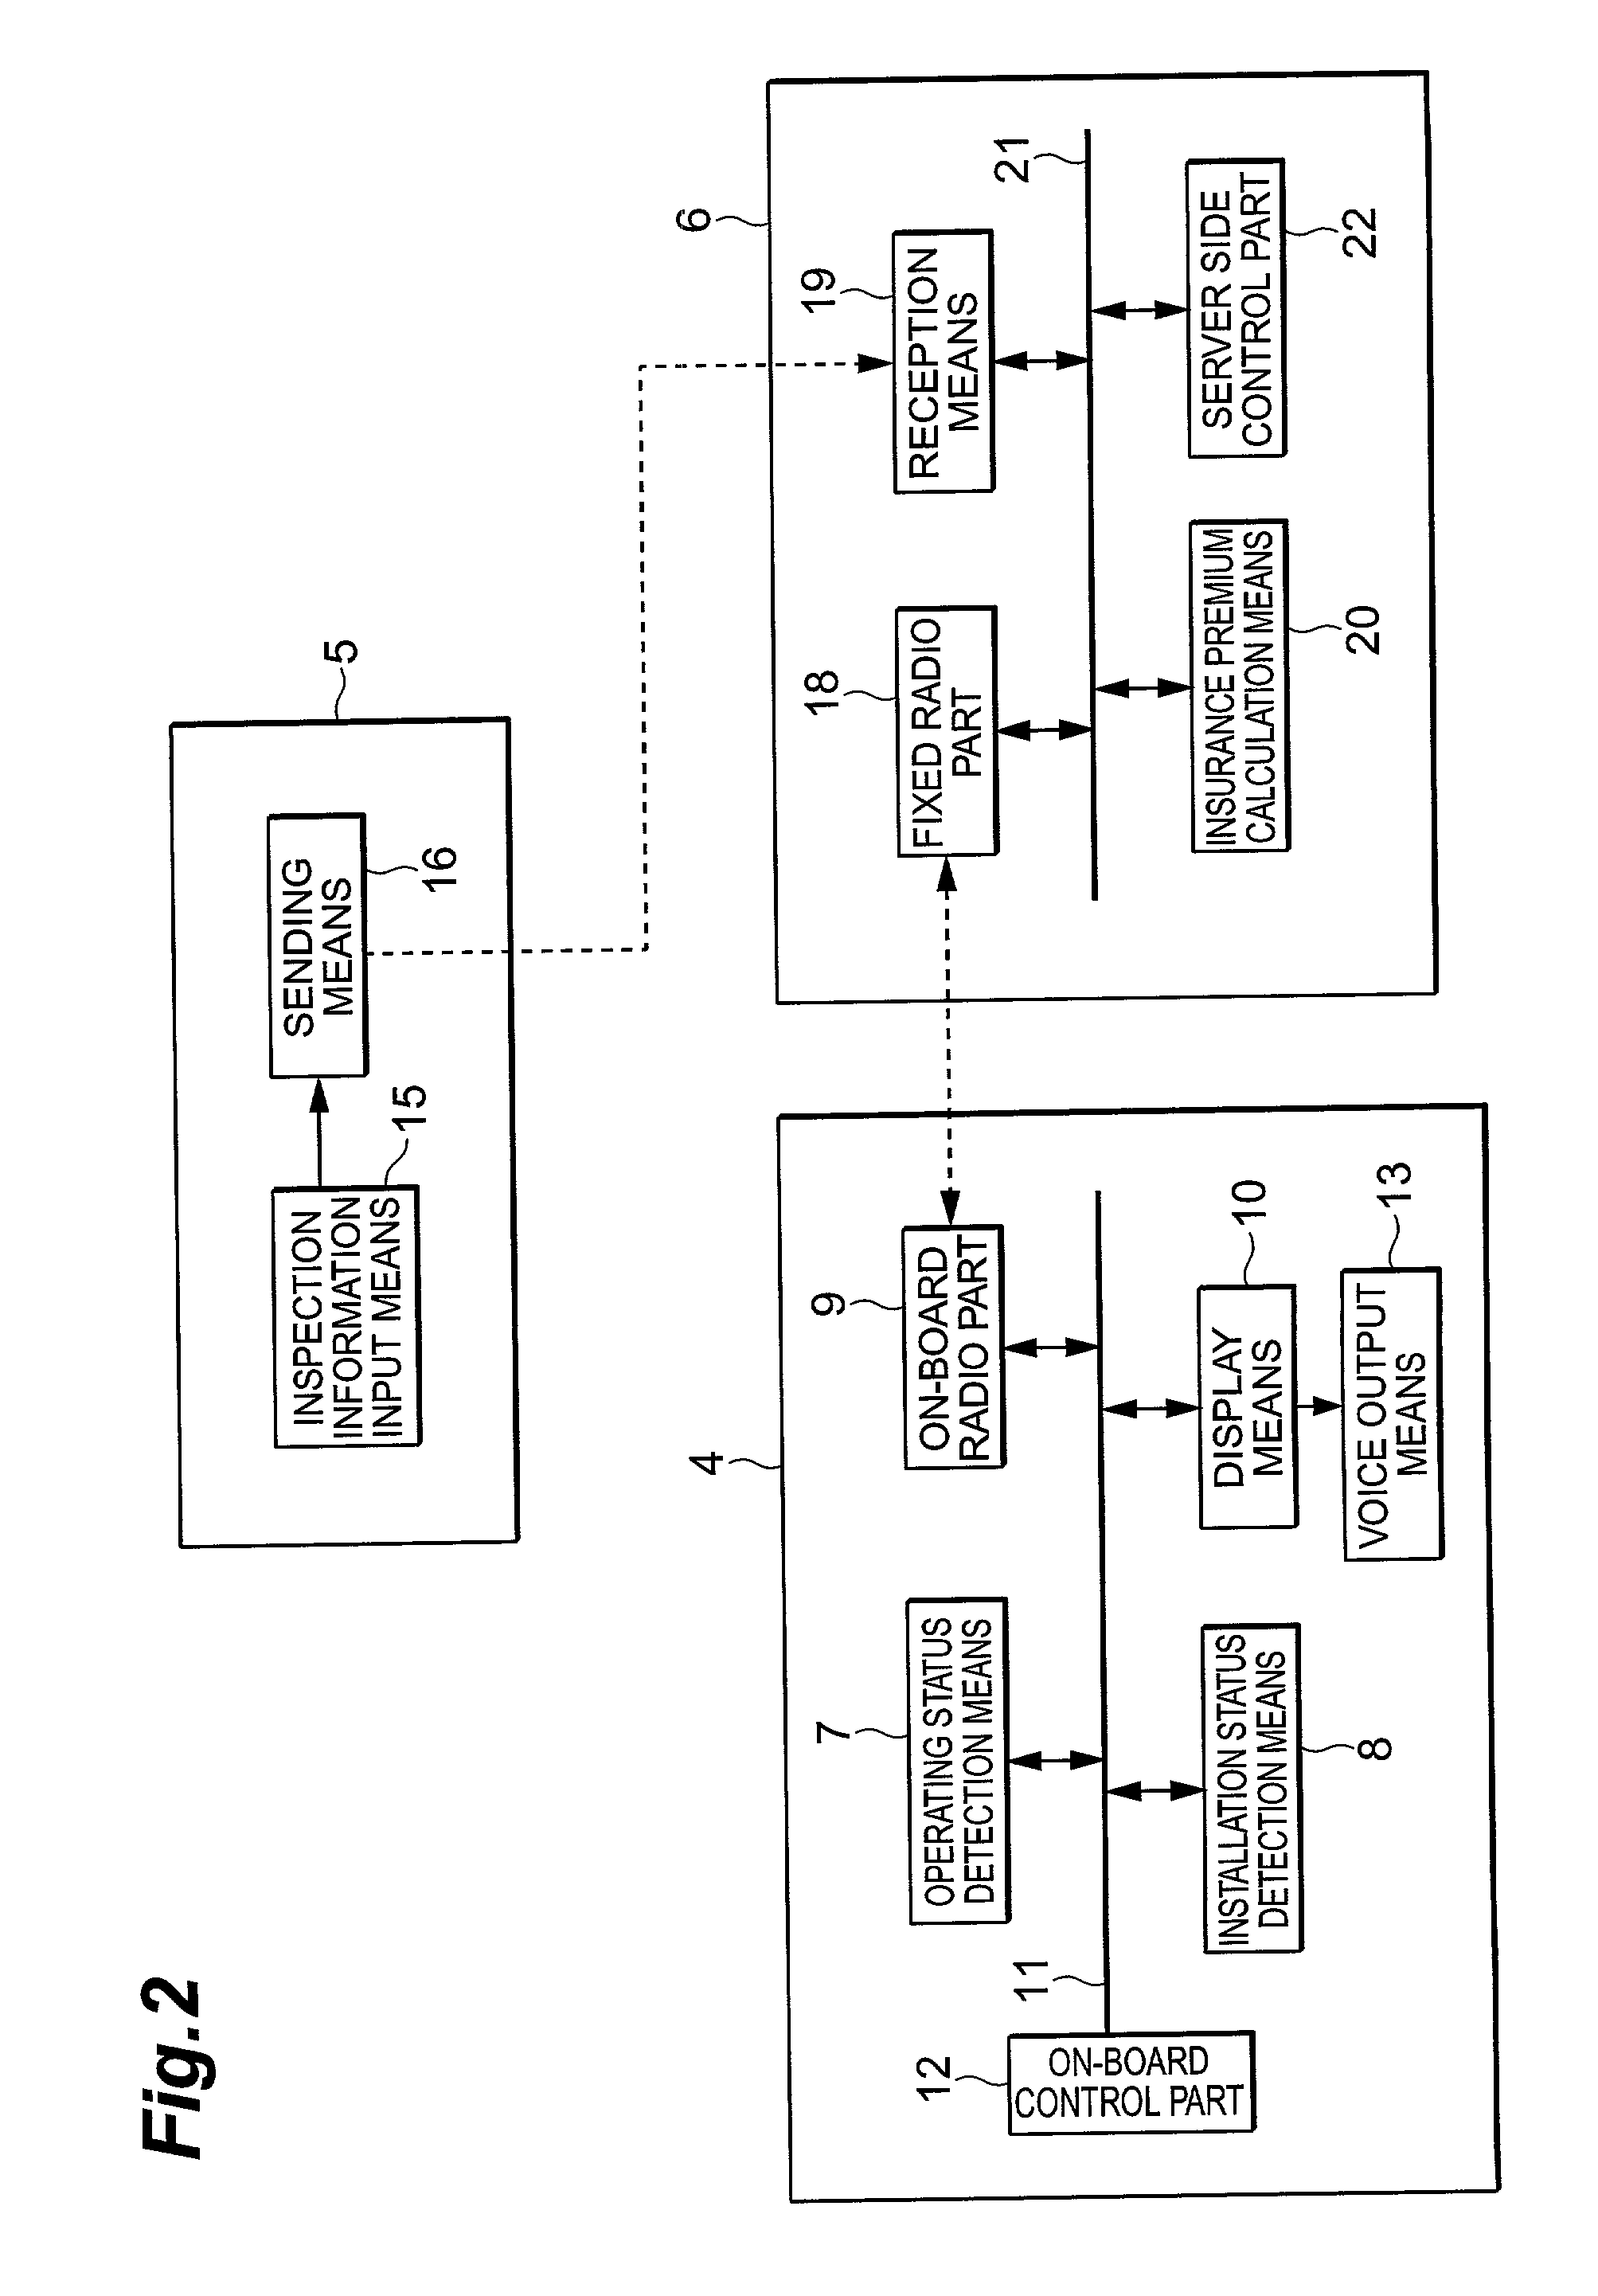 Vehicle insurance premium calculation system, on-board apparatus, and server apparatus